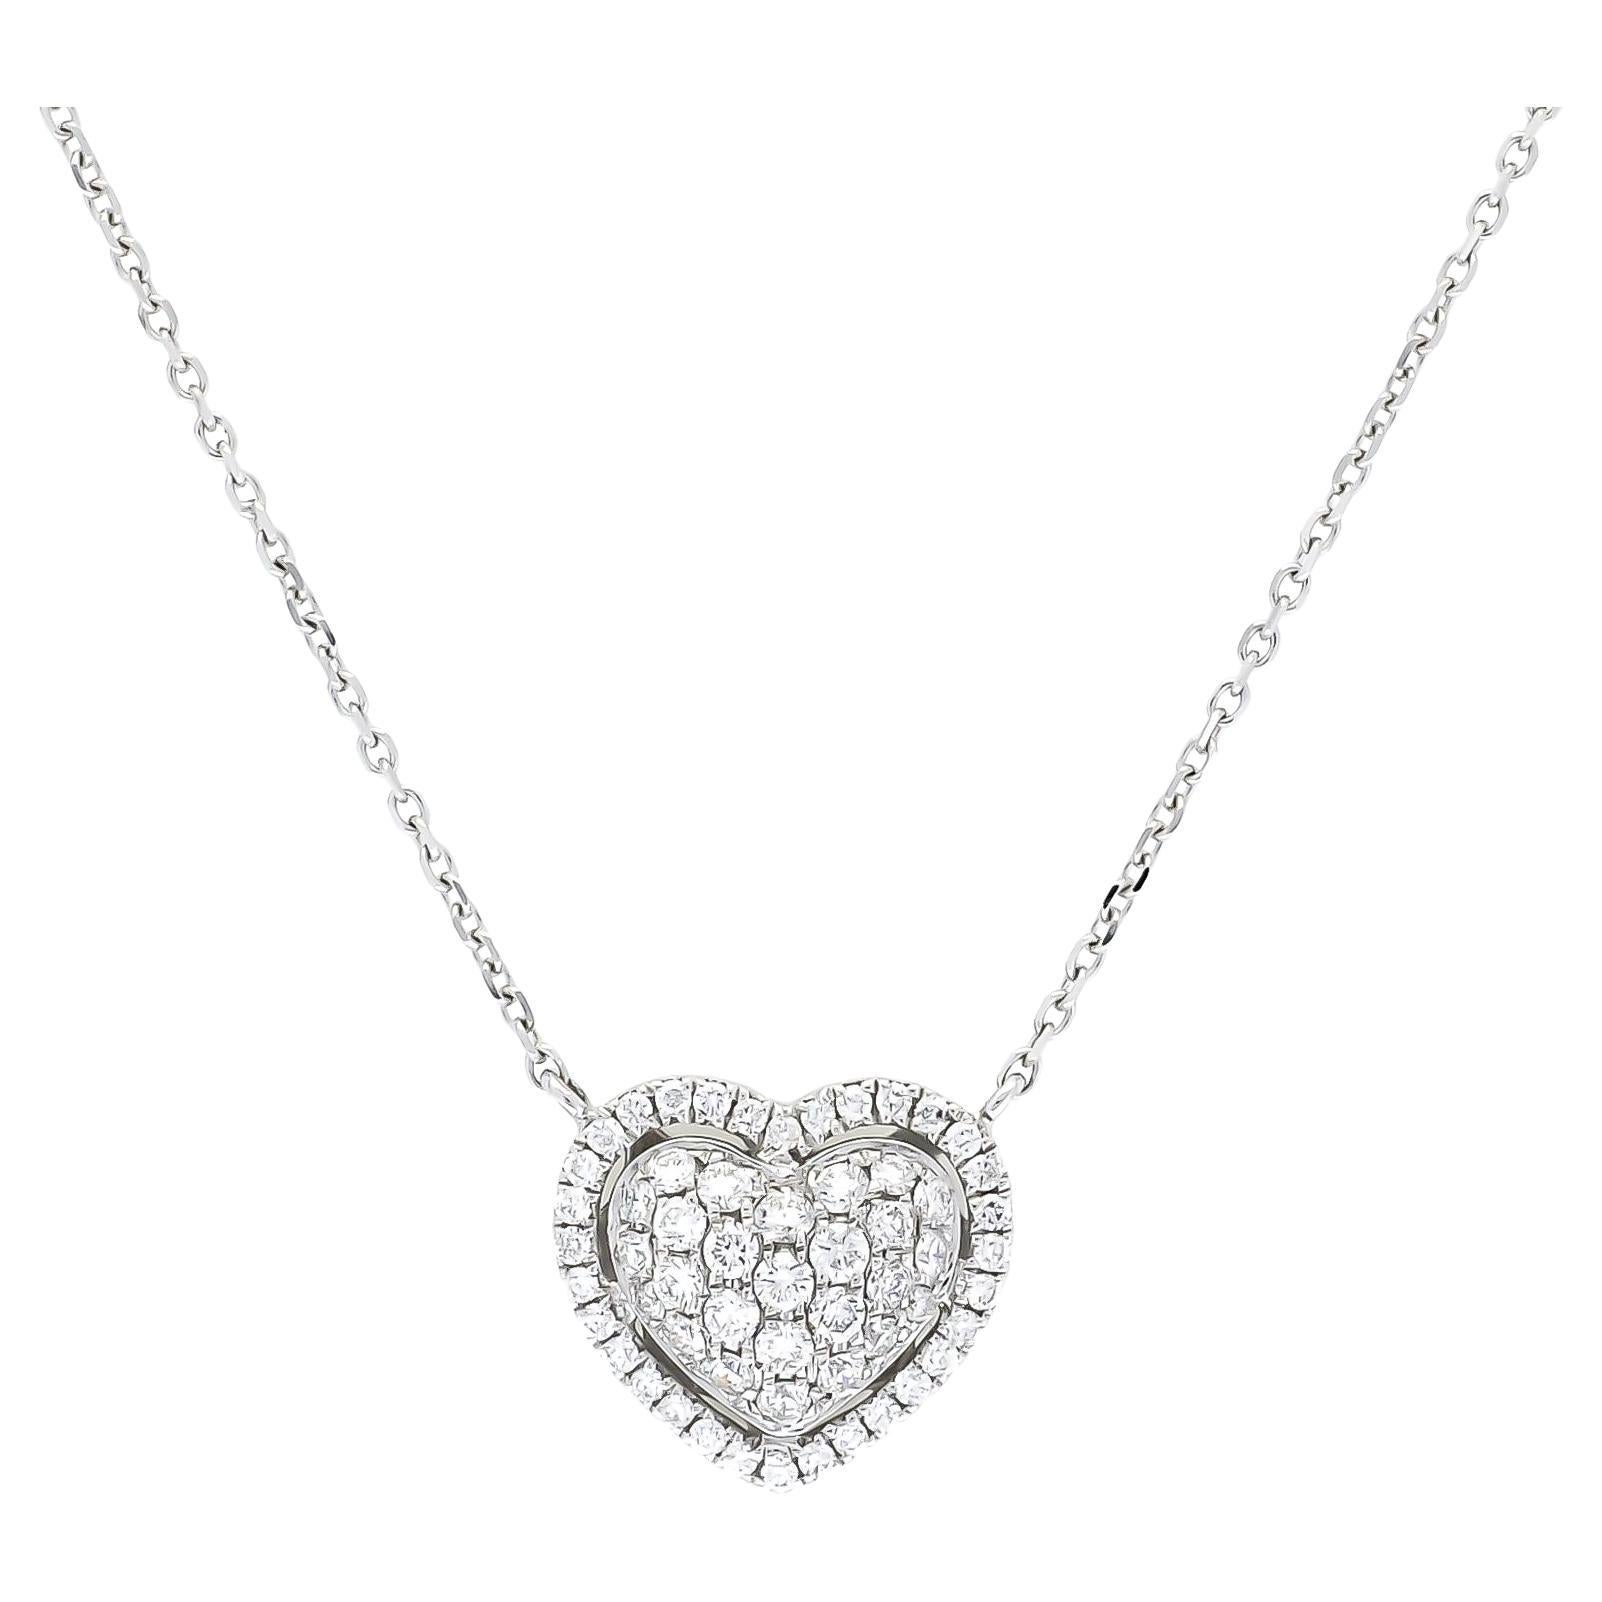 Natural Diamond Pendant 0.55 cts 18KT White Gold Heart Pendant Necklace For Sale